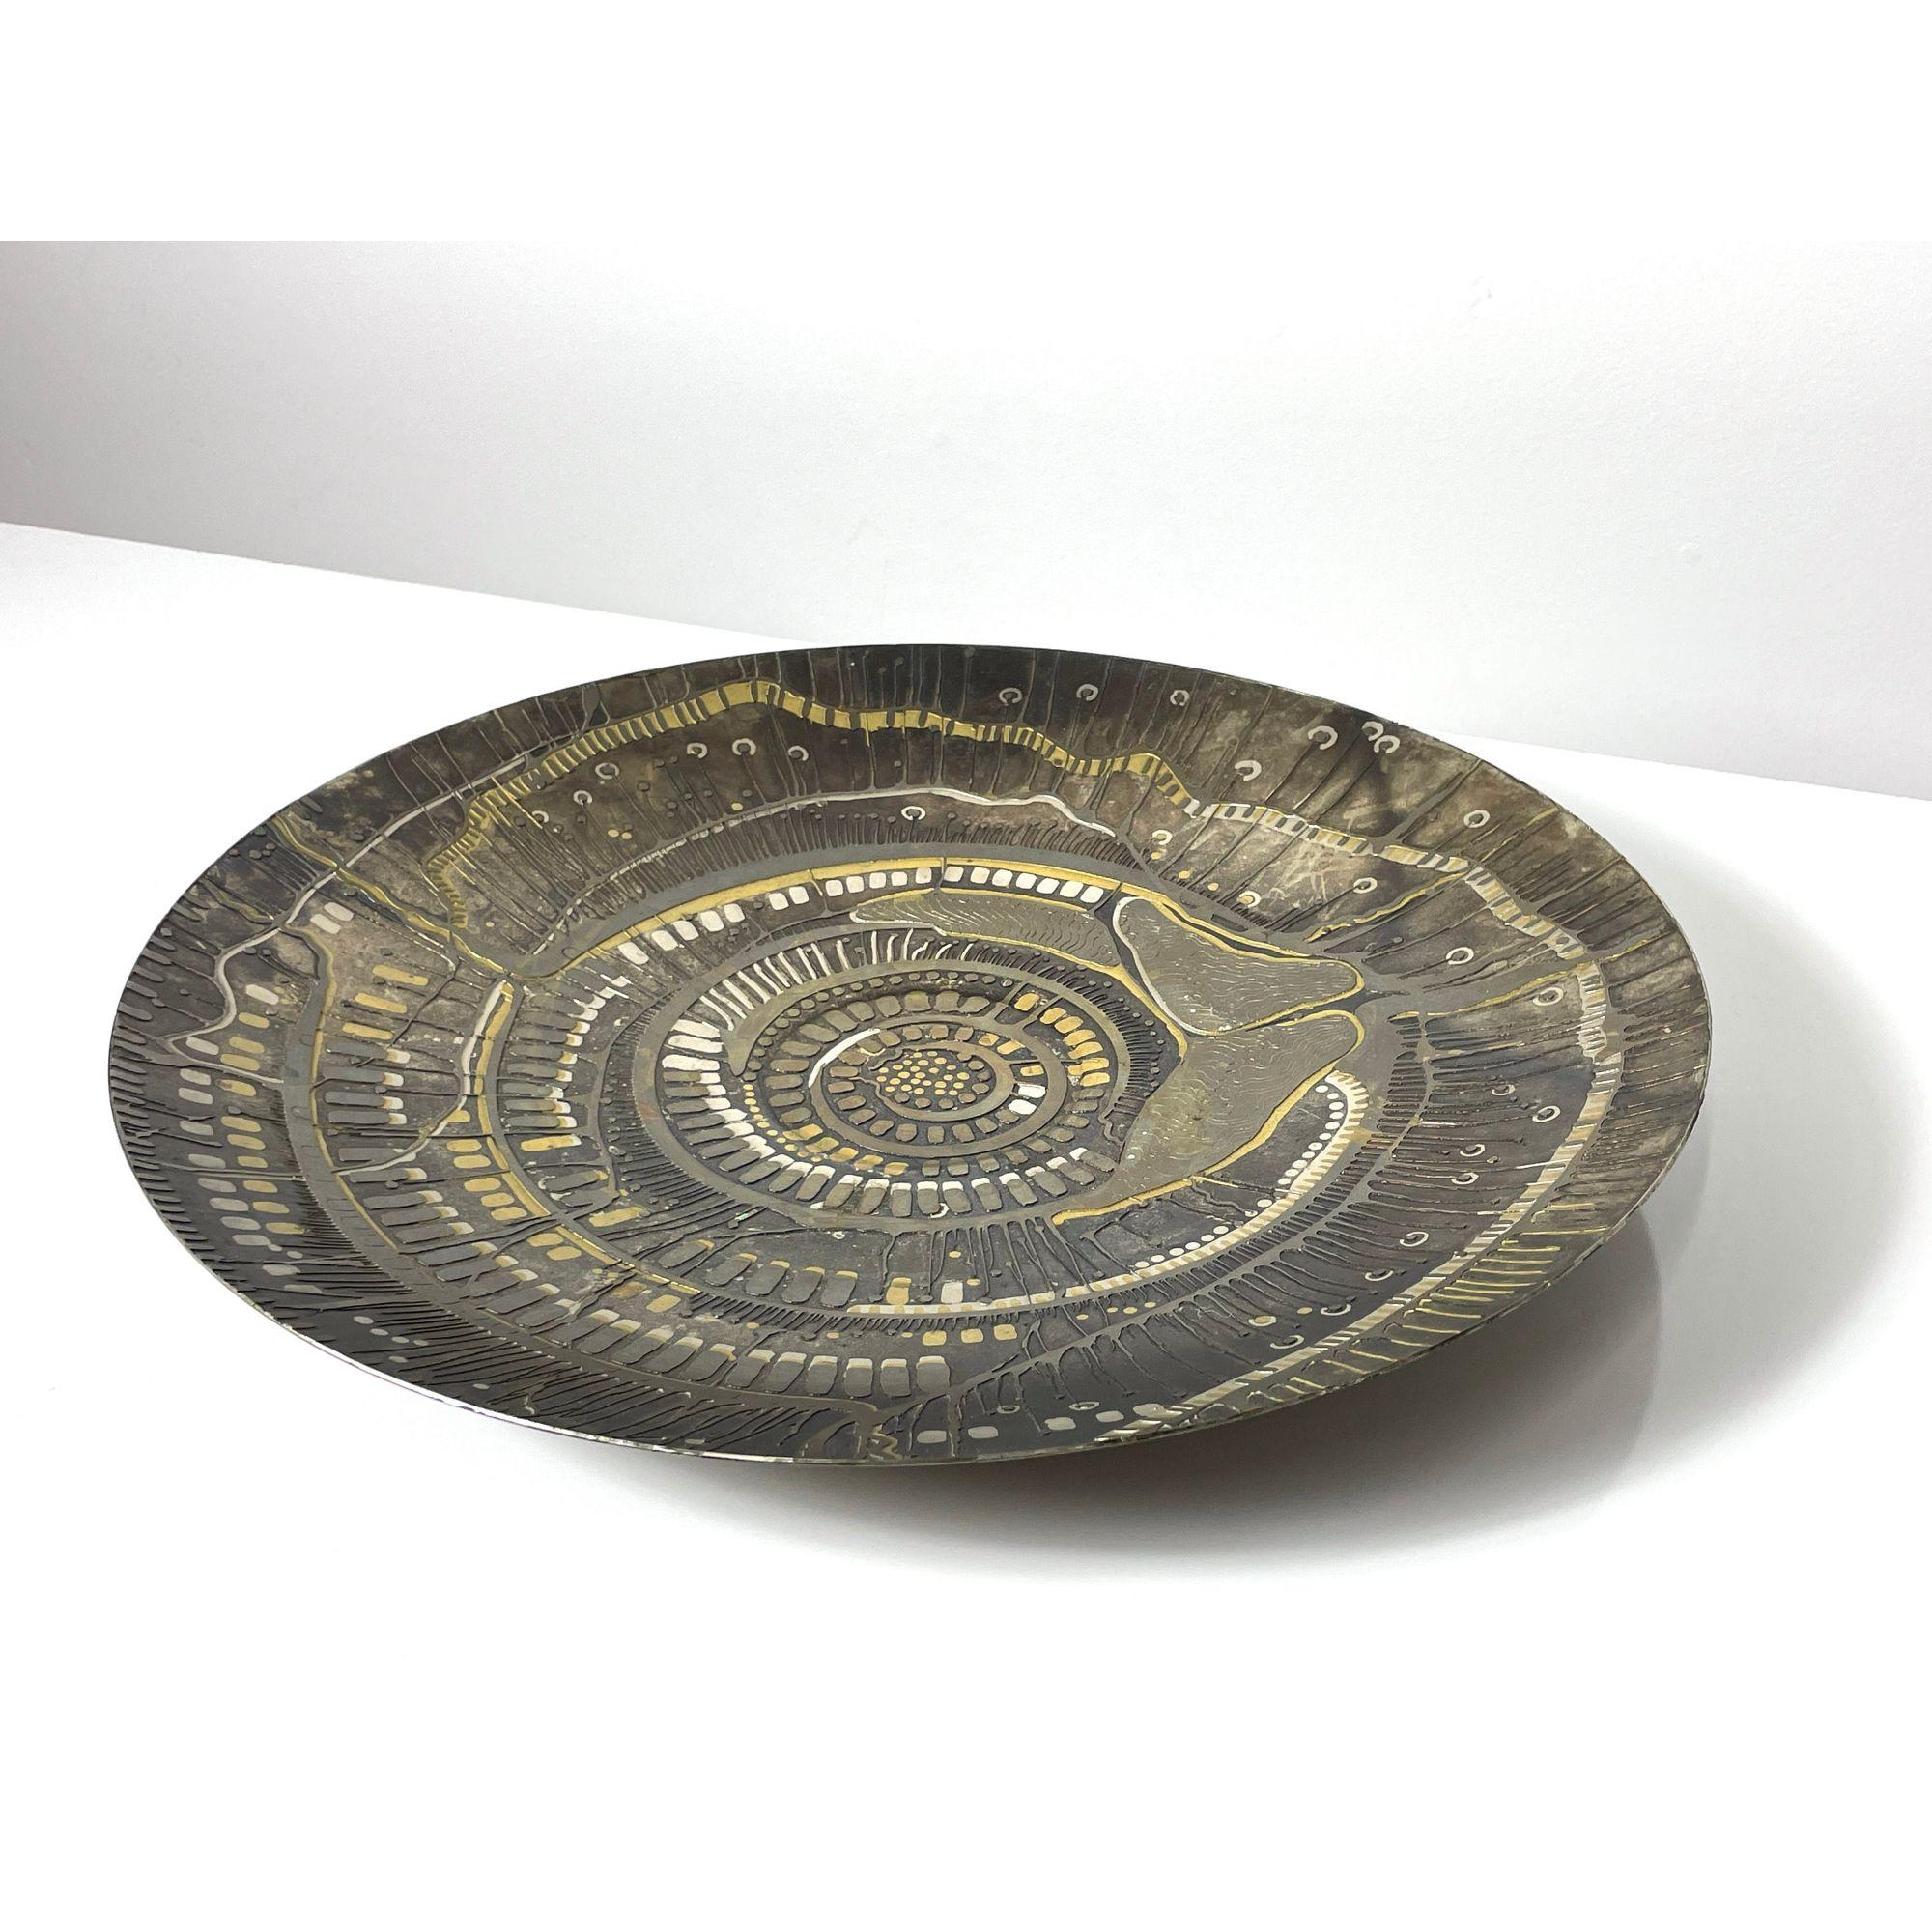 Vintage Mixed Metal Sculptural Bowl by Lee Peck 1960s

Rare handcrafted sculptural bowl by Lee Barnes Peck of Chicago 1960s
Mixed metals and patterns applied to a shallow brass bowl
Signed to underside

Additional Information:
Materials: Mixed